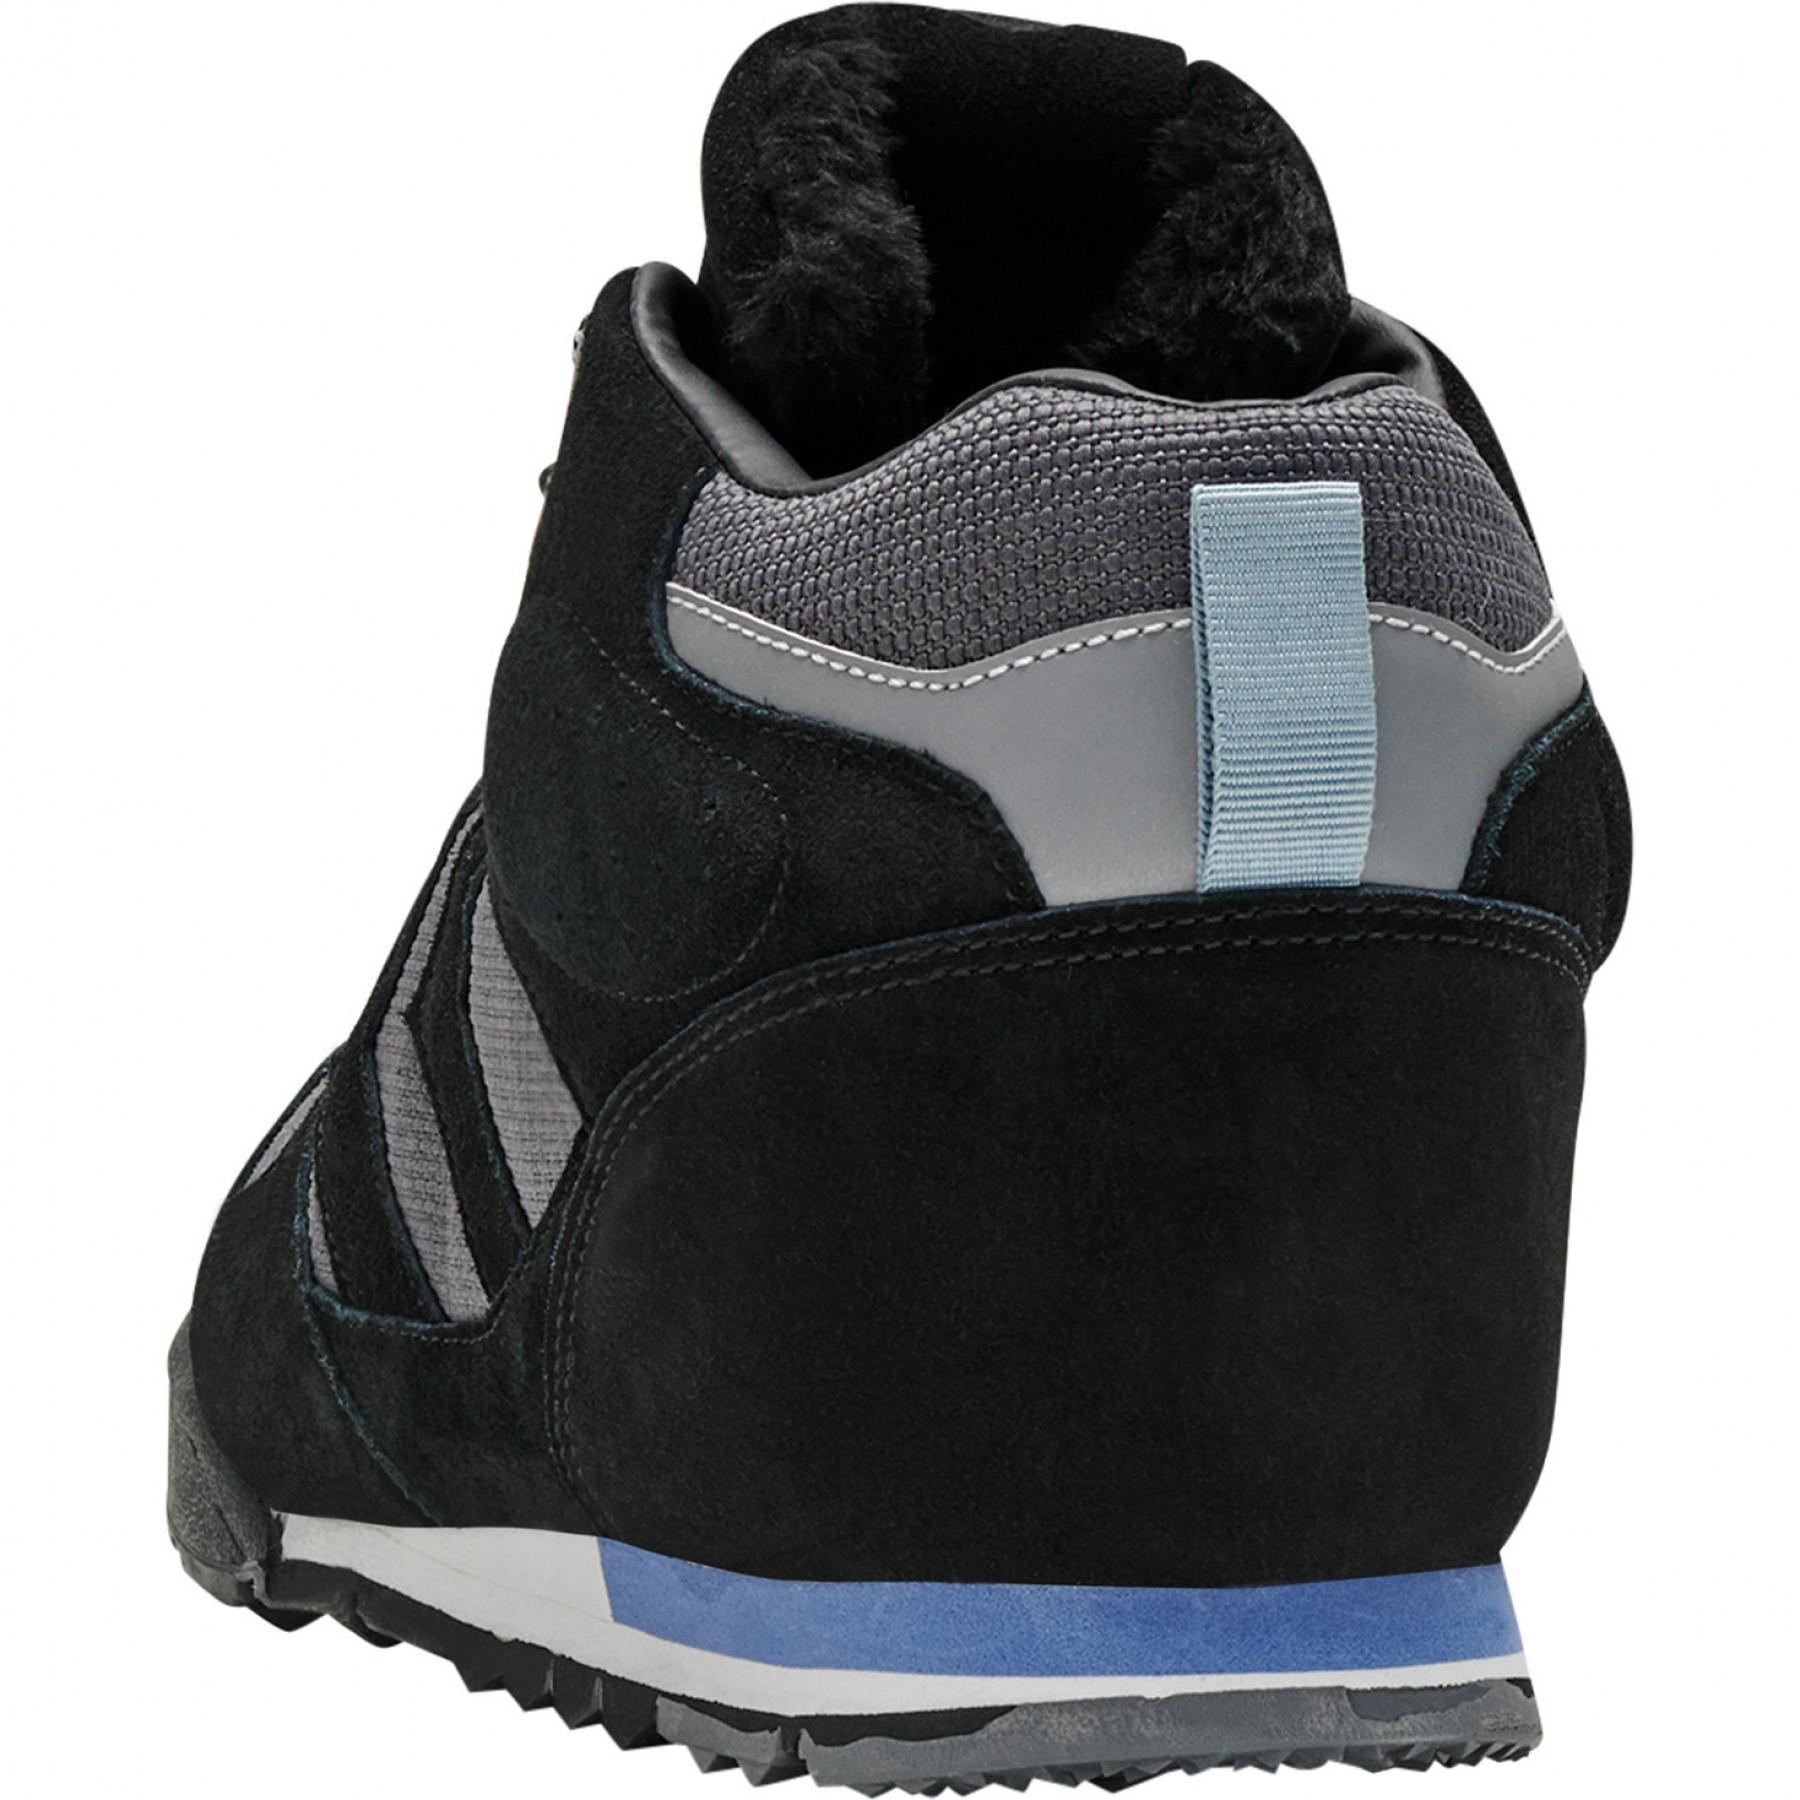 Formadores Hummel nordic roots forest mid